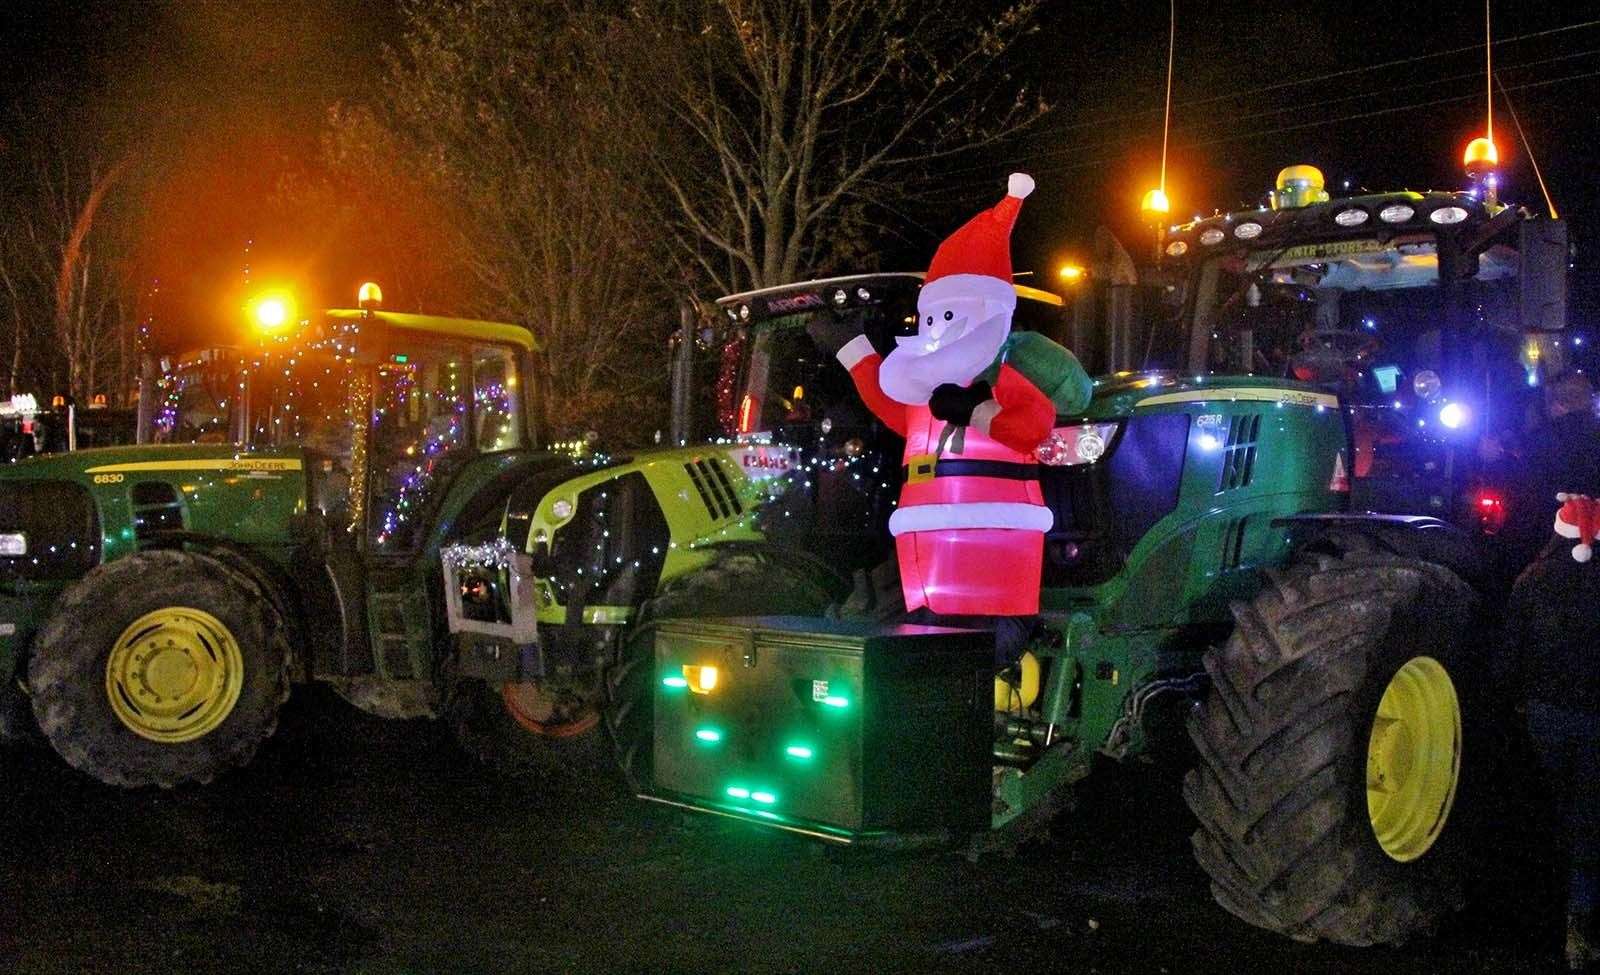 A cheery Santa on this tractor. Picture: Ian Rennie.